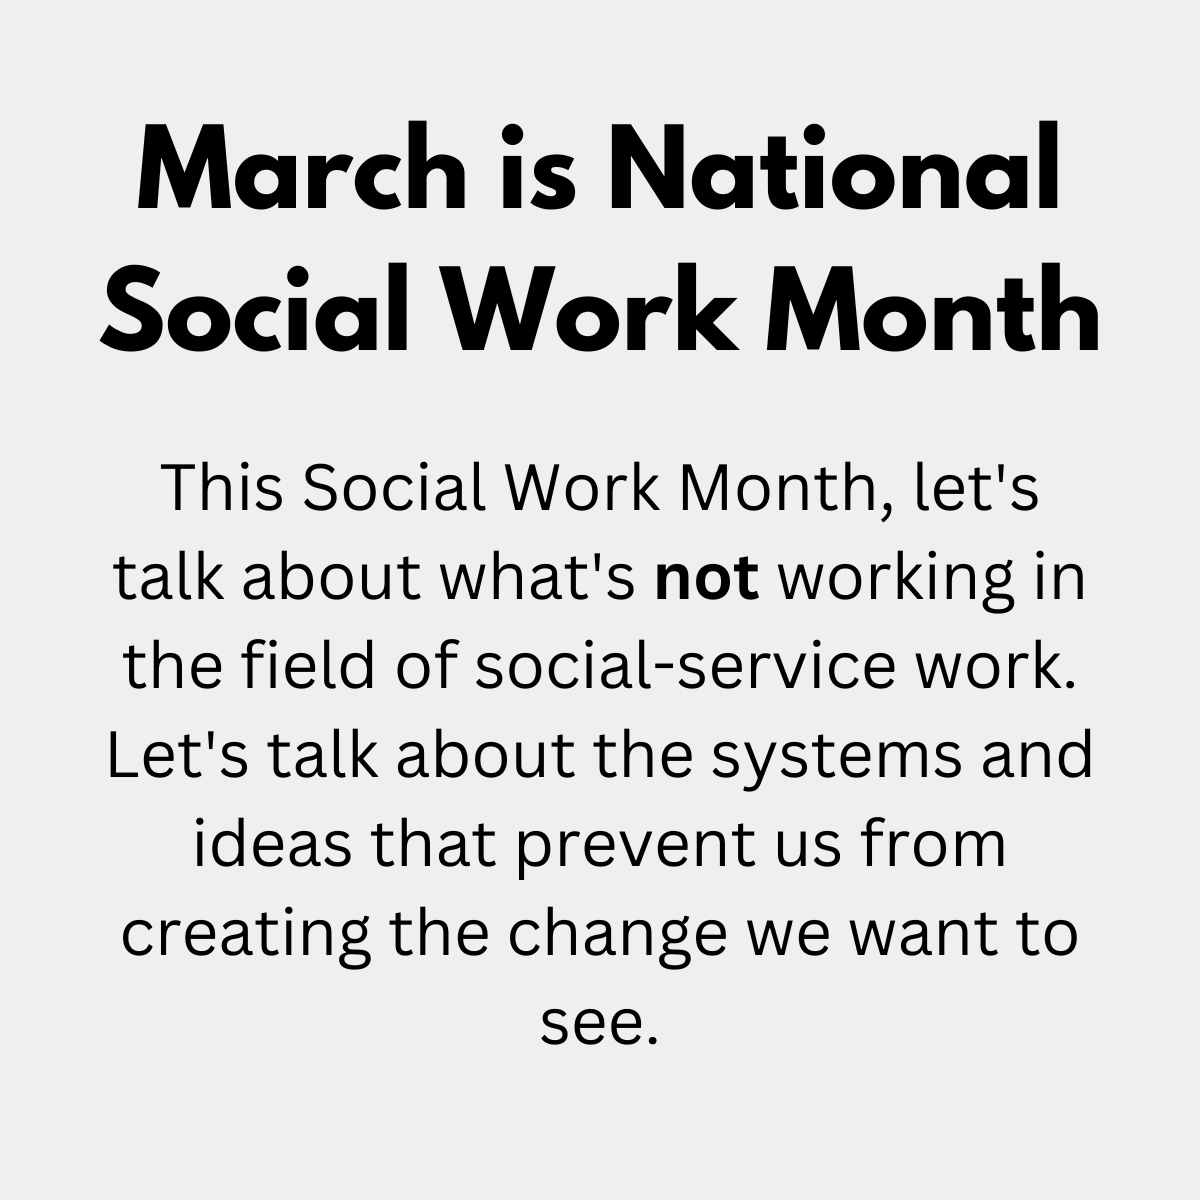 This Social Work Month, let's talk about what's NOT working in the field of social-service work! #SocialWorkMonth #SocialWorkTwitter #socialwork #idea #SWACtivism #SWAC #activist #advocacy